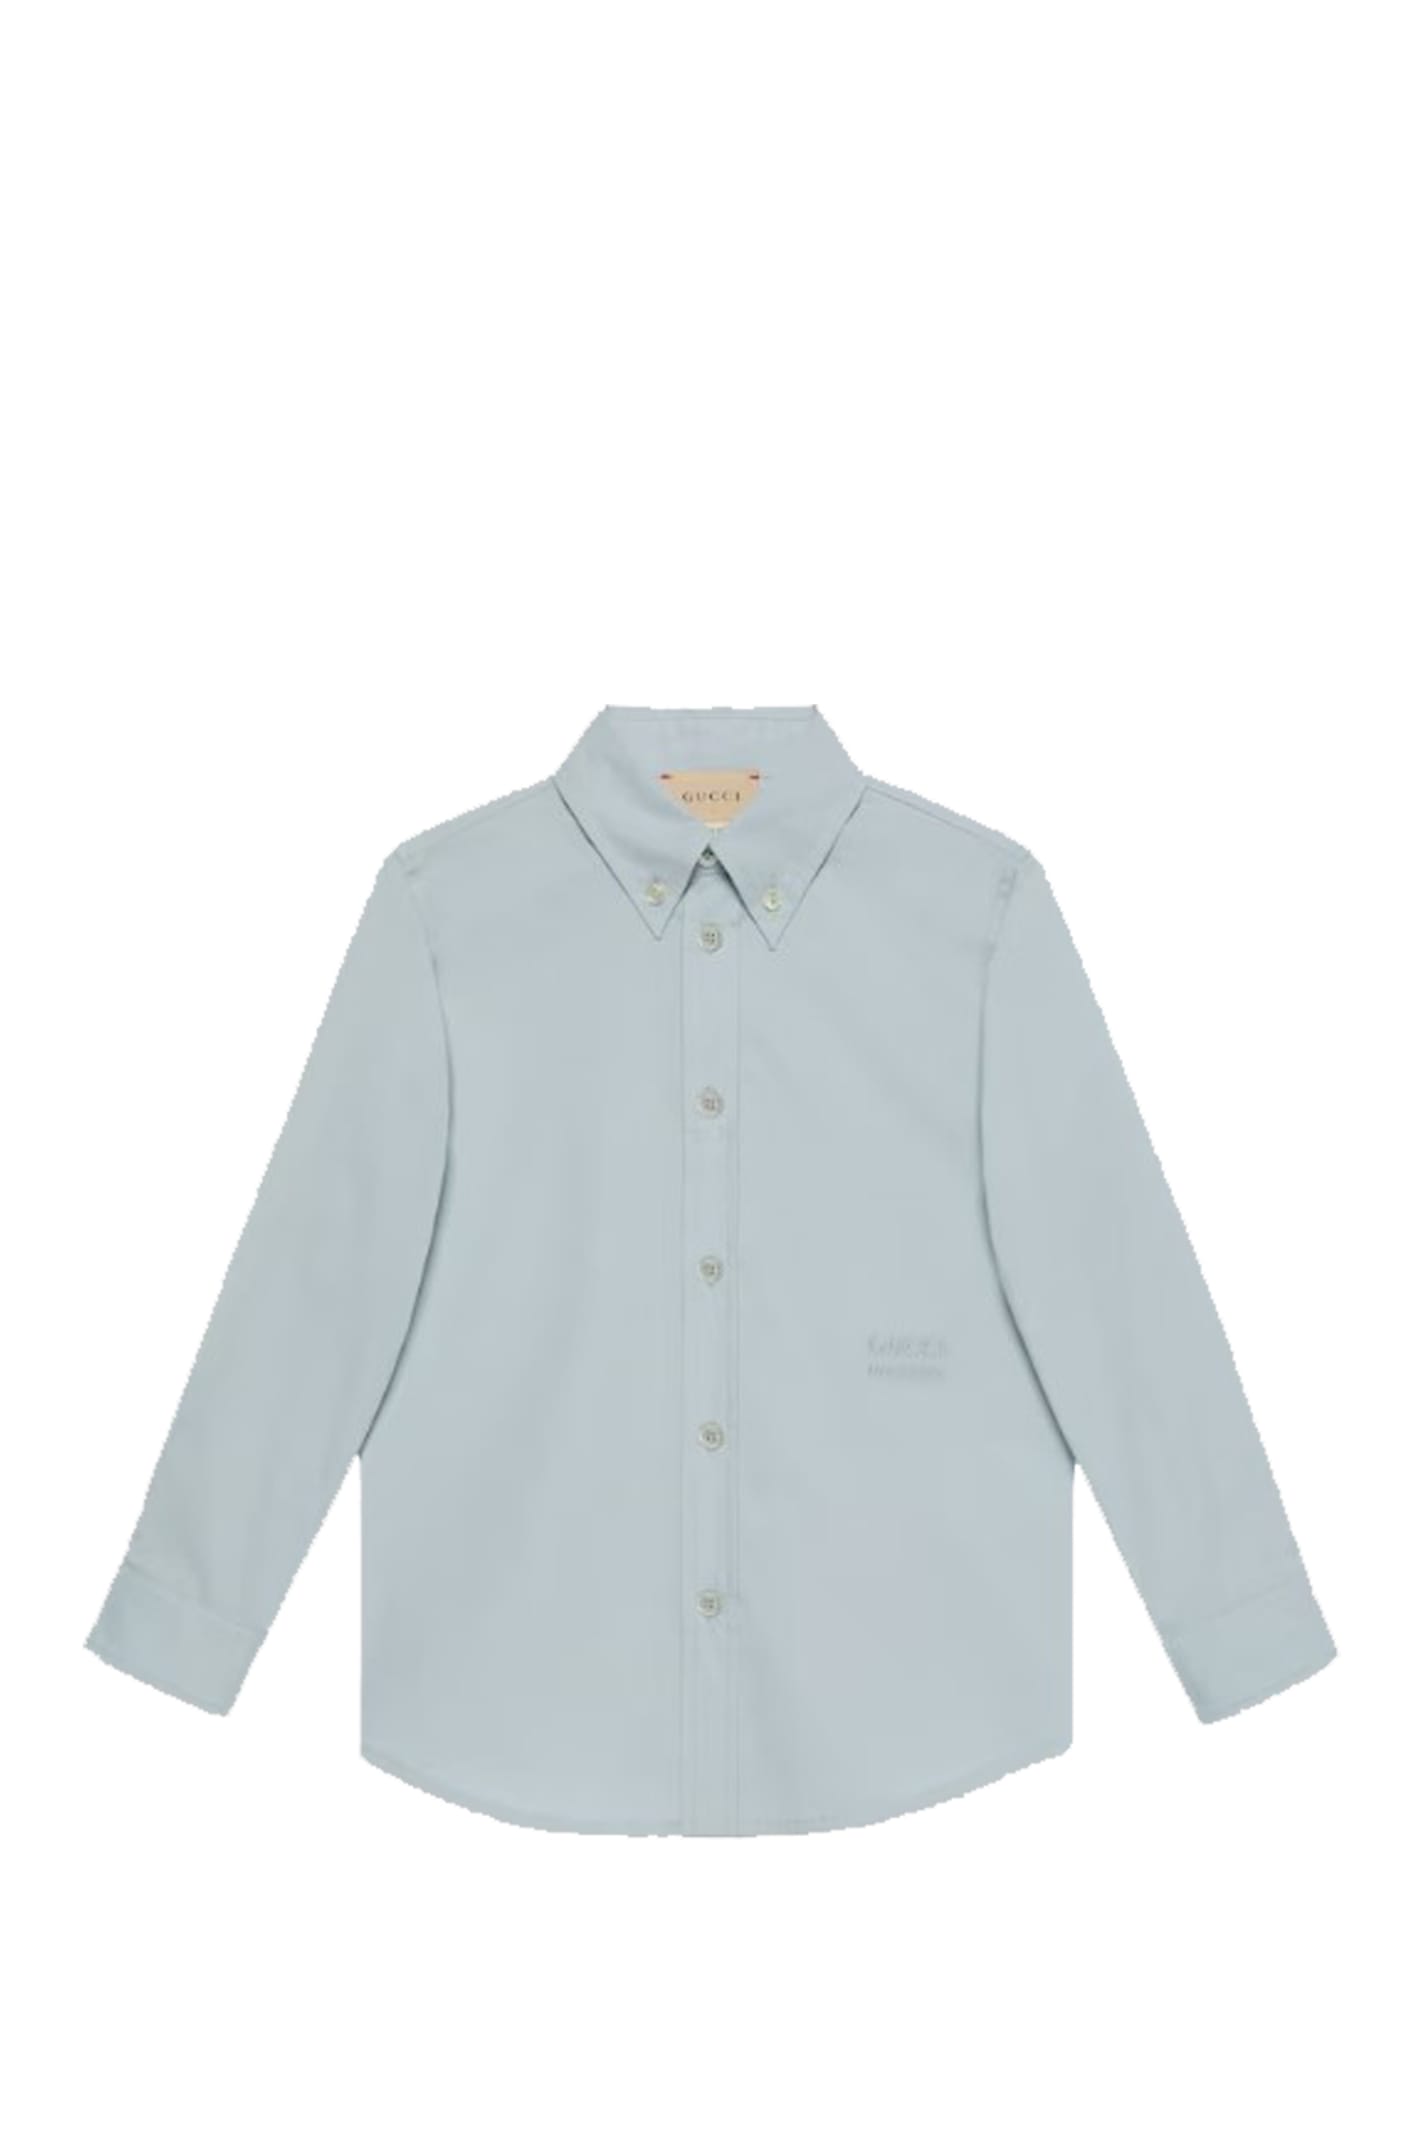 Gucci Kids' Cotton Shirt With Embroidery In Light Blue